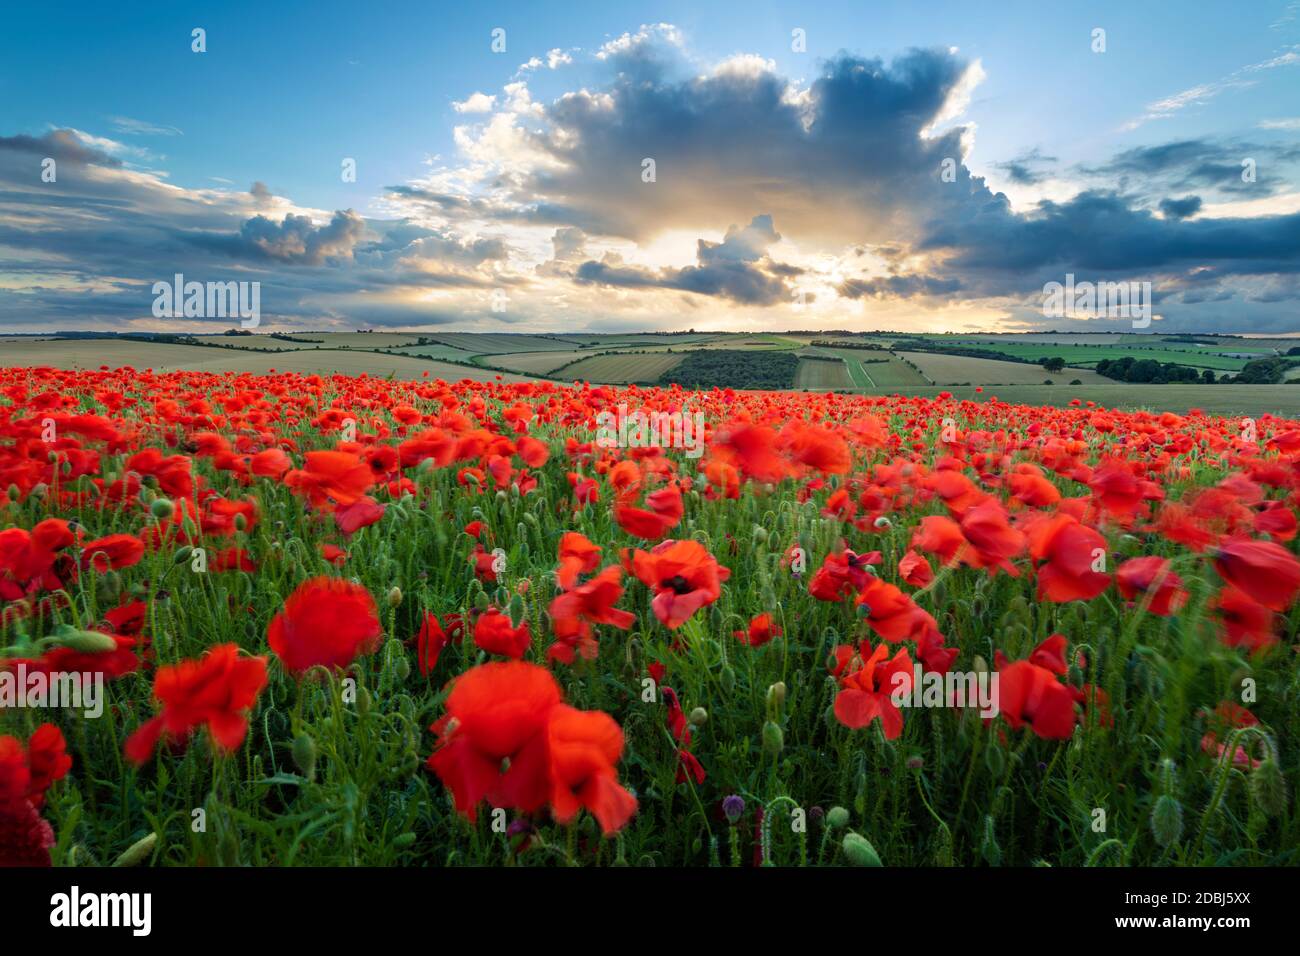 Mass of red poppies growing in field in Lambourn Valley at sunset, East Garston, West Berkshire, England, United Kingdom, Europe Stock Photo